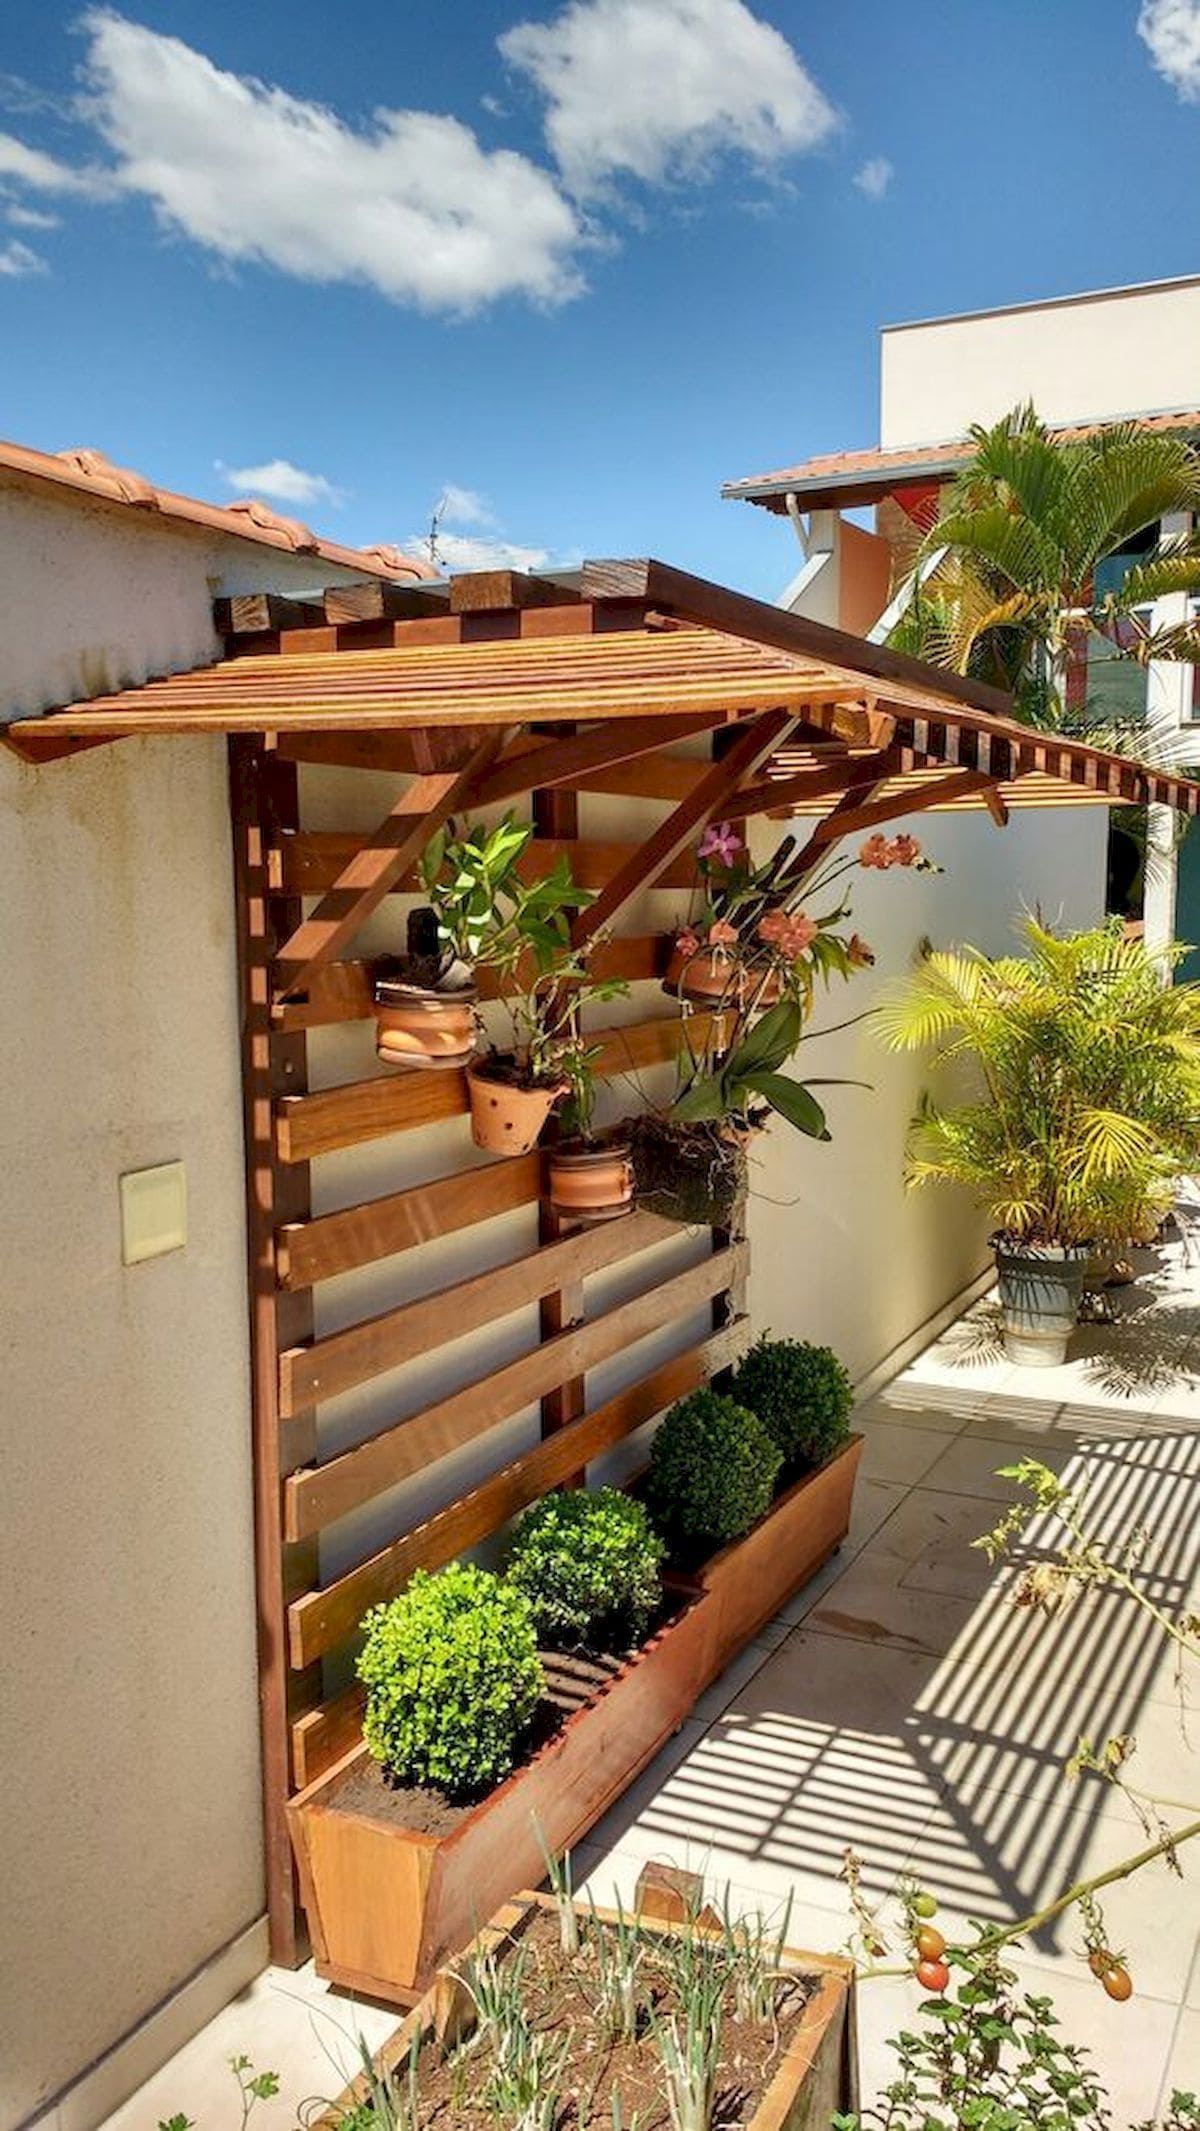 20 ideas for landscaping gardens and backyards with pallets - 141